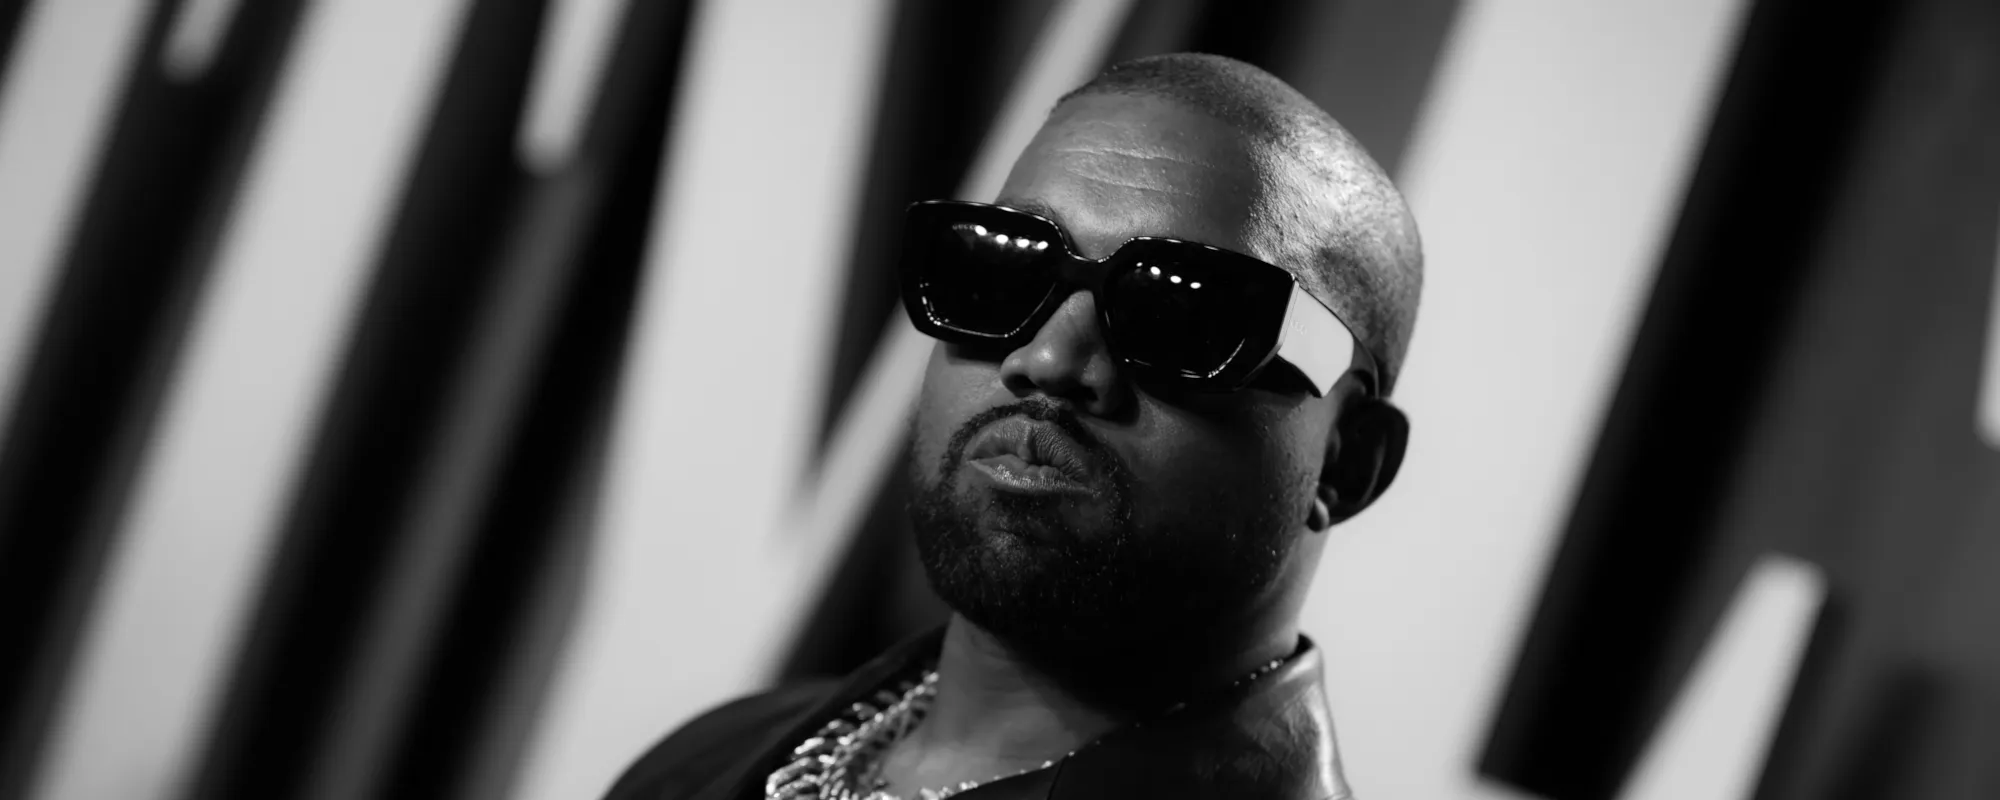 Kanye West Sued By Texas Pastor Over ‘Donda’ Song “Come to Life”